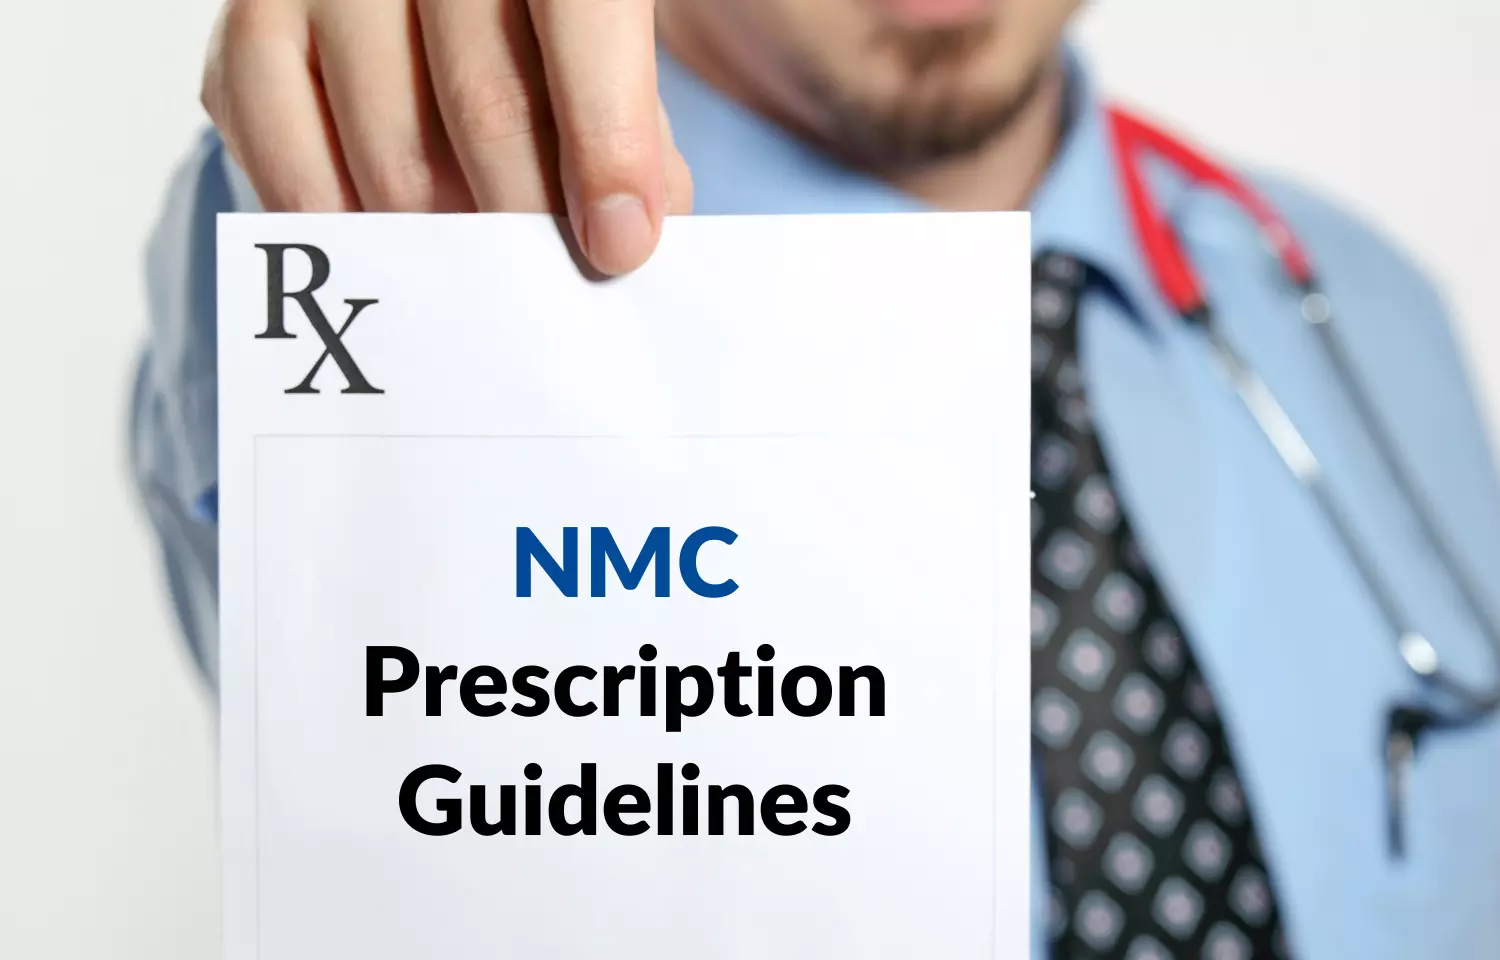 Doctors Should write generic, non-proprietary, pharmacological names only: NMC Prescription Guidelines